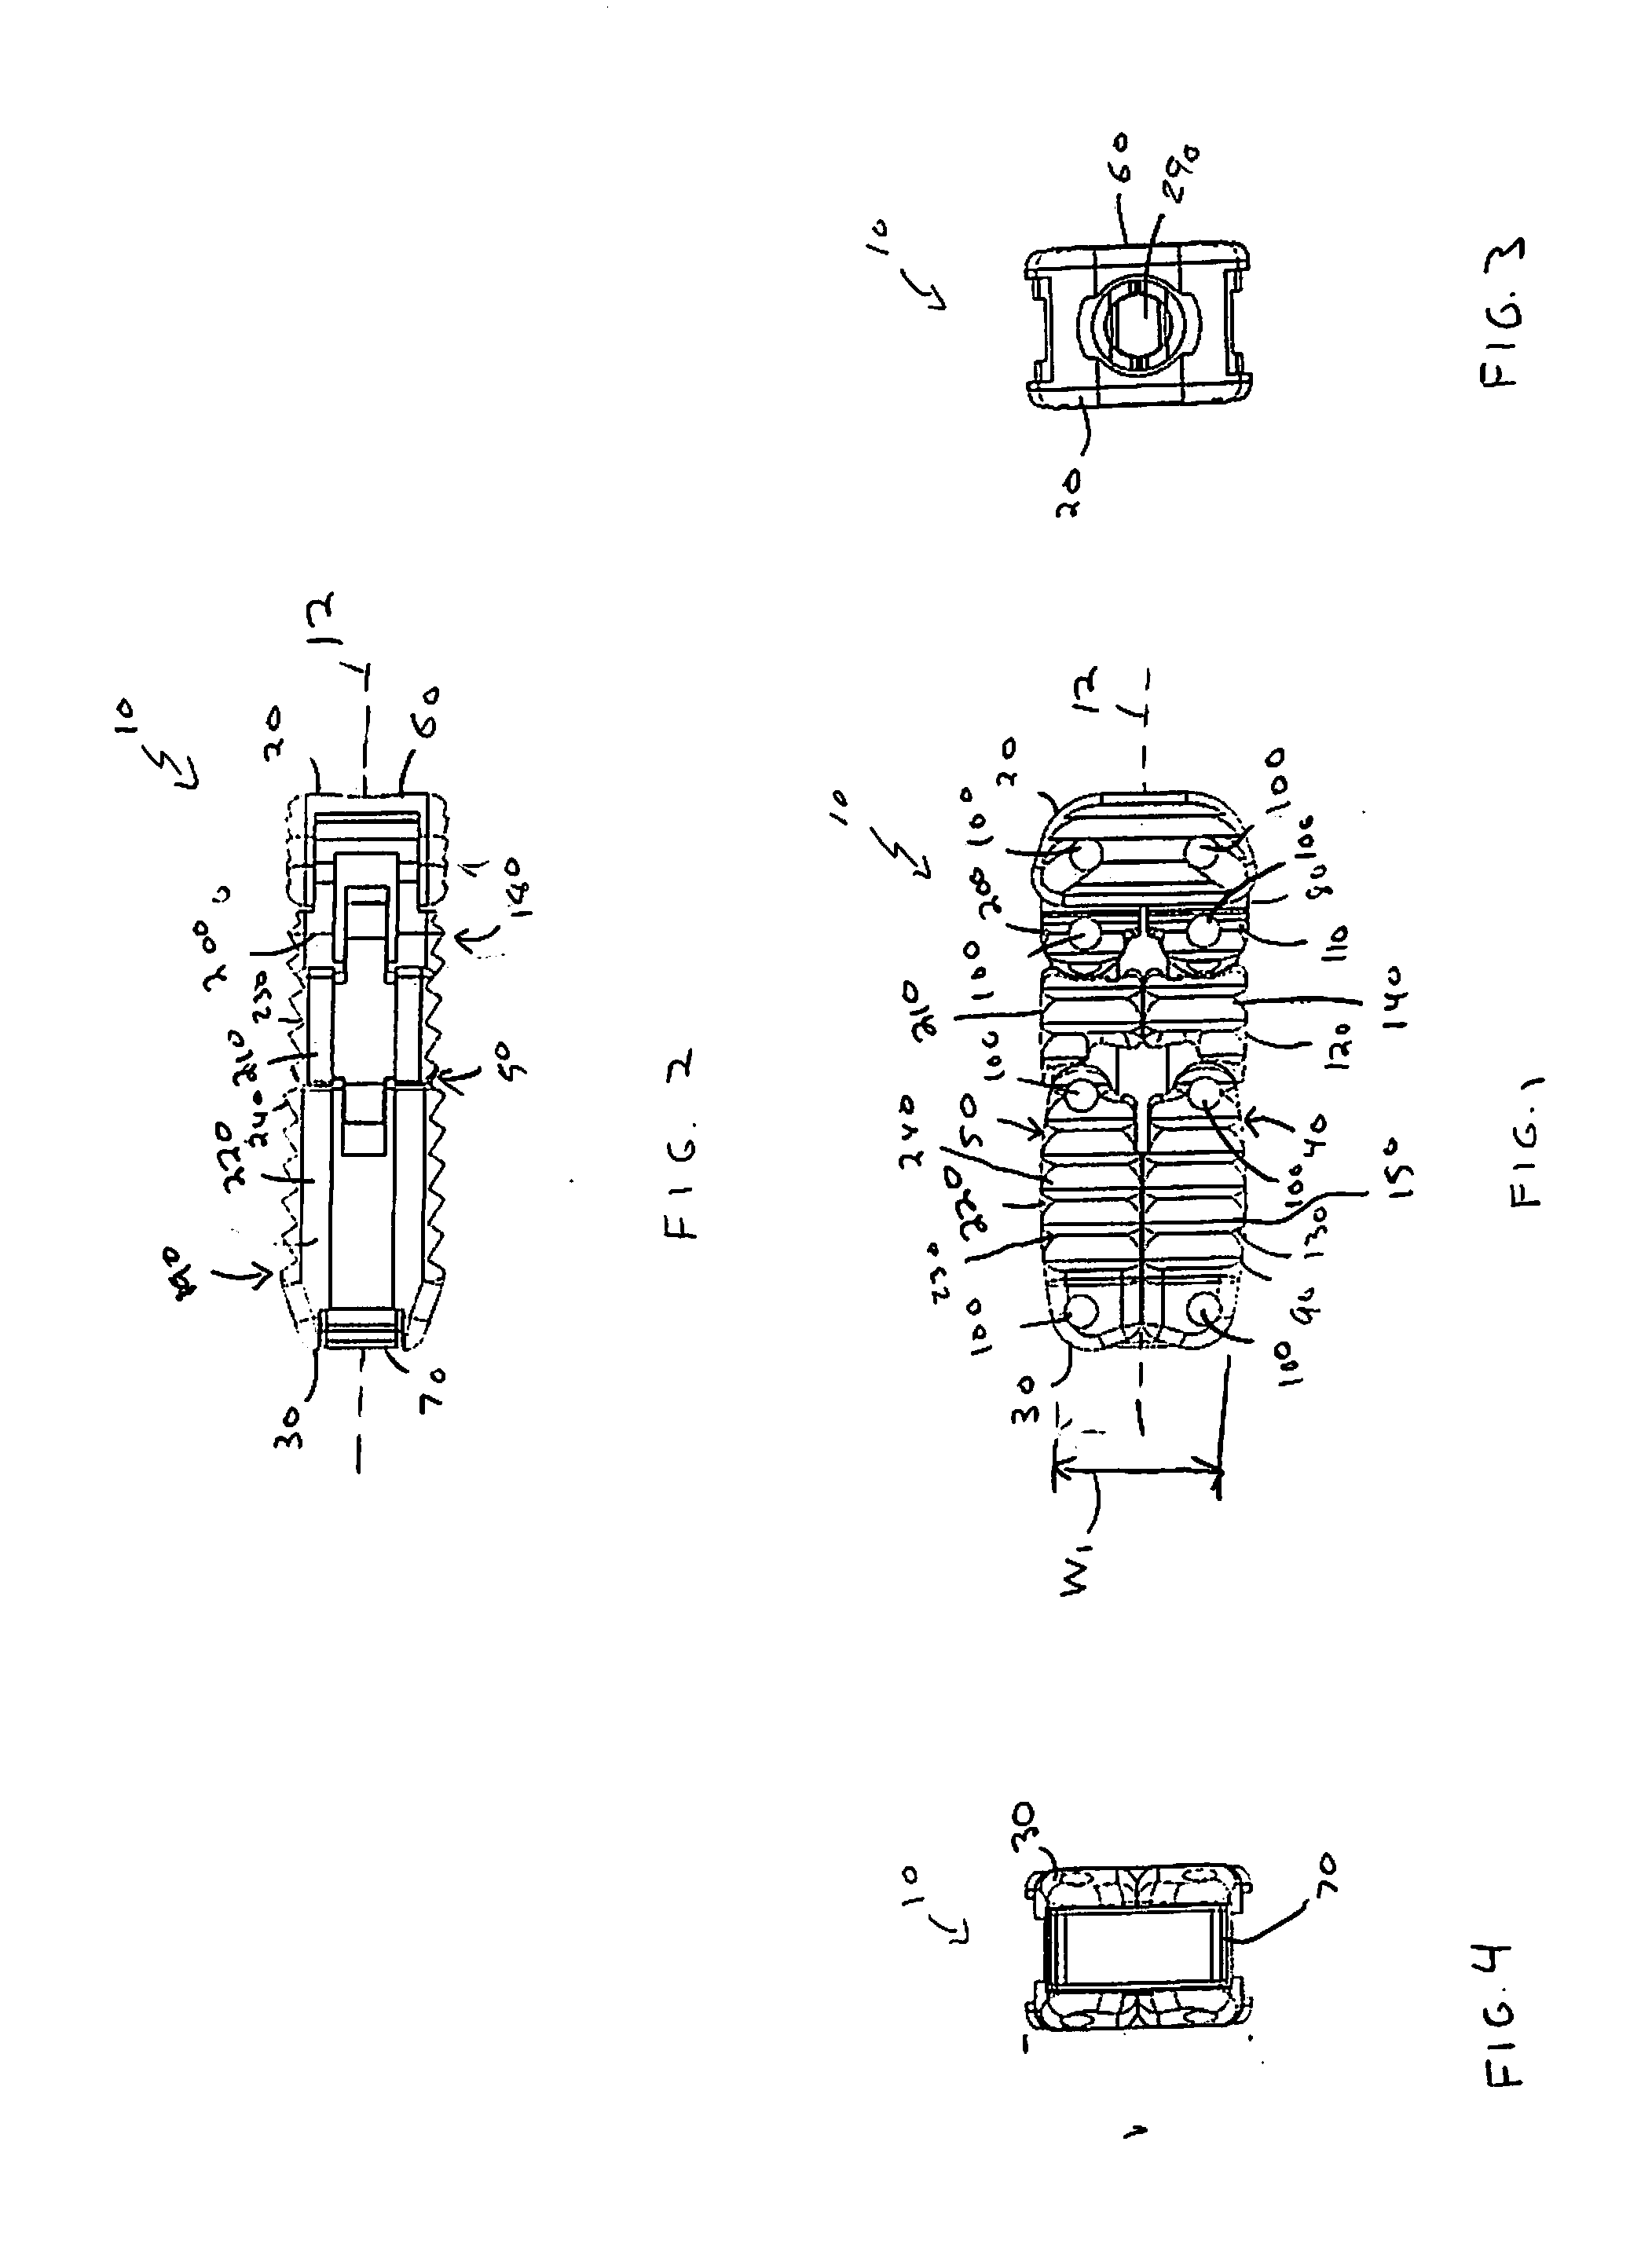 Expandable Interbody Spacer